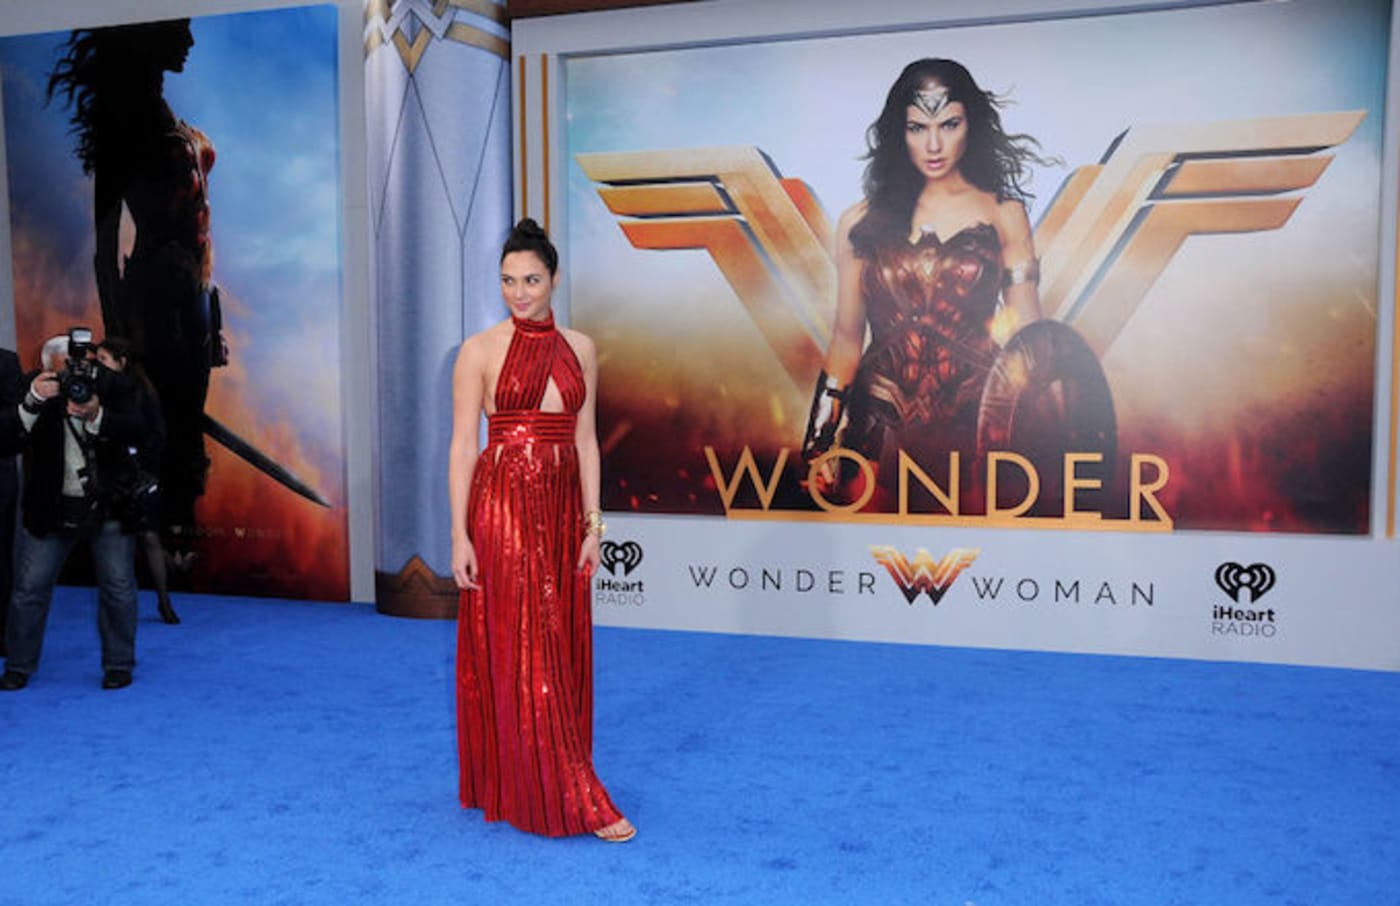 Gal Gadot attends the World Premiere of Warner Bros. Pictures' 'Wonder Woman'